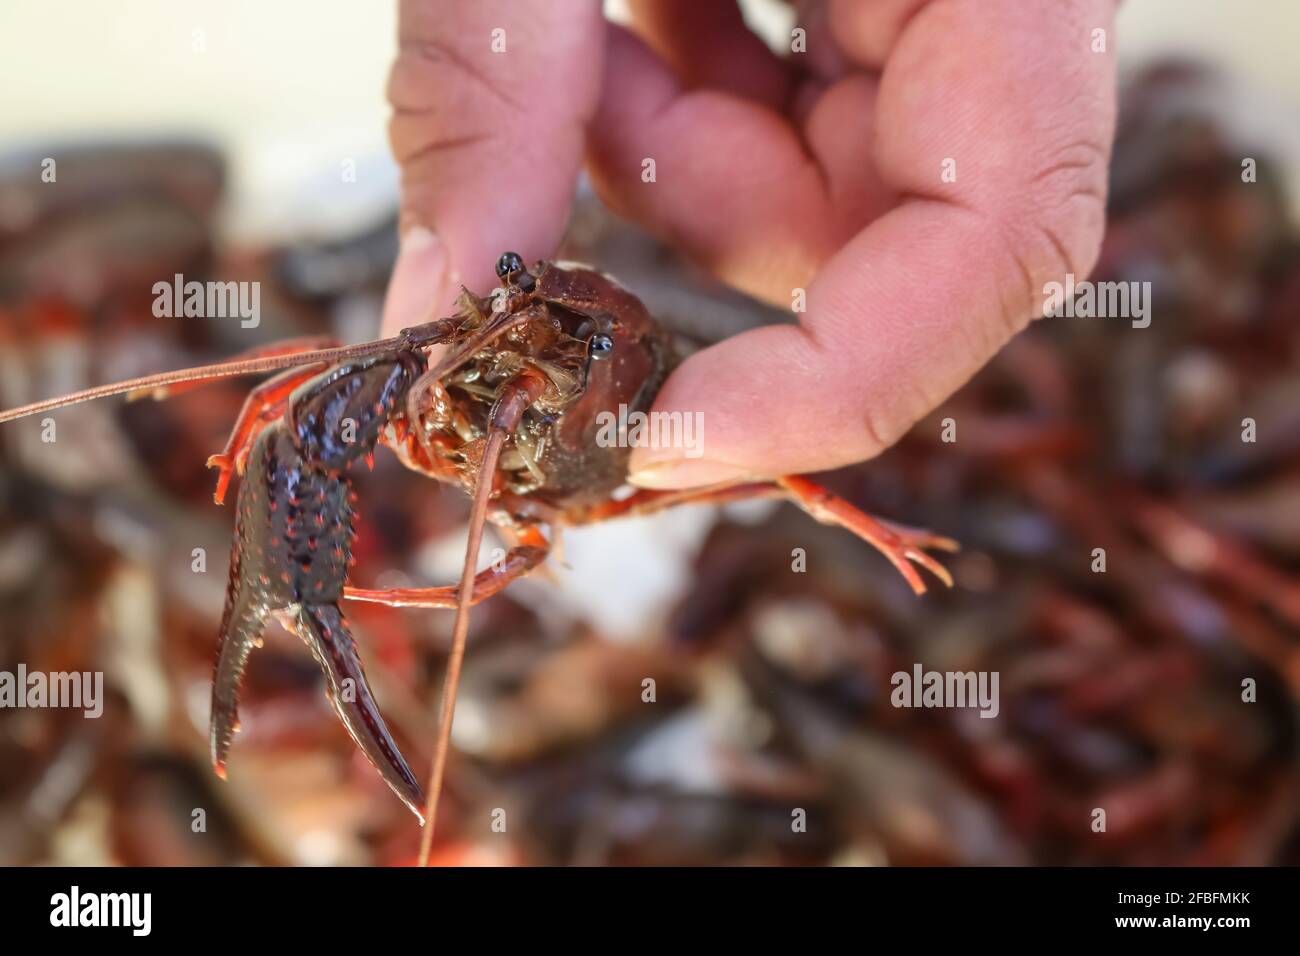 Close-up of bug-eyed cray fish held by hand - selective focus- blurry background Stock Photo